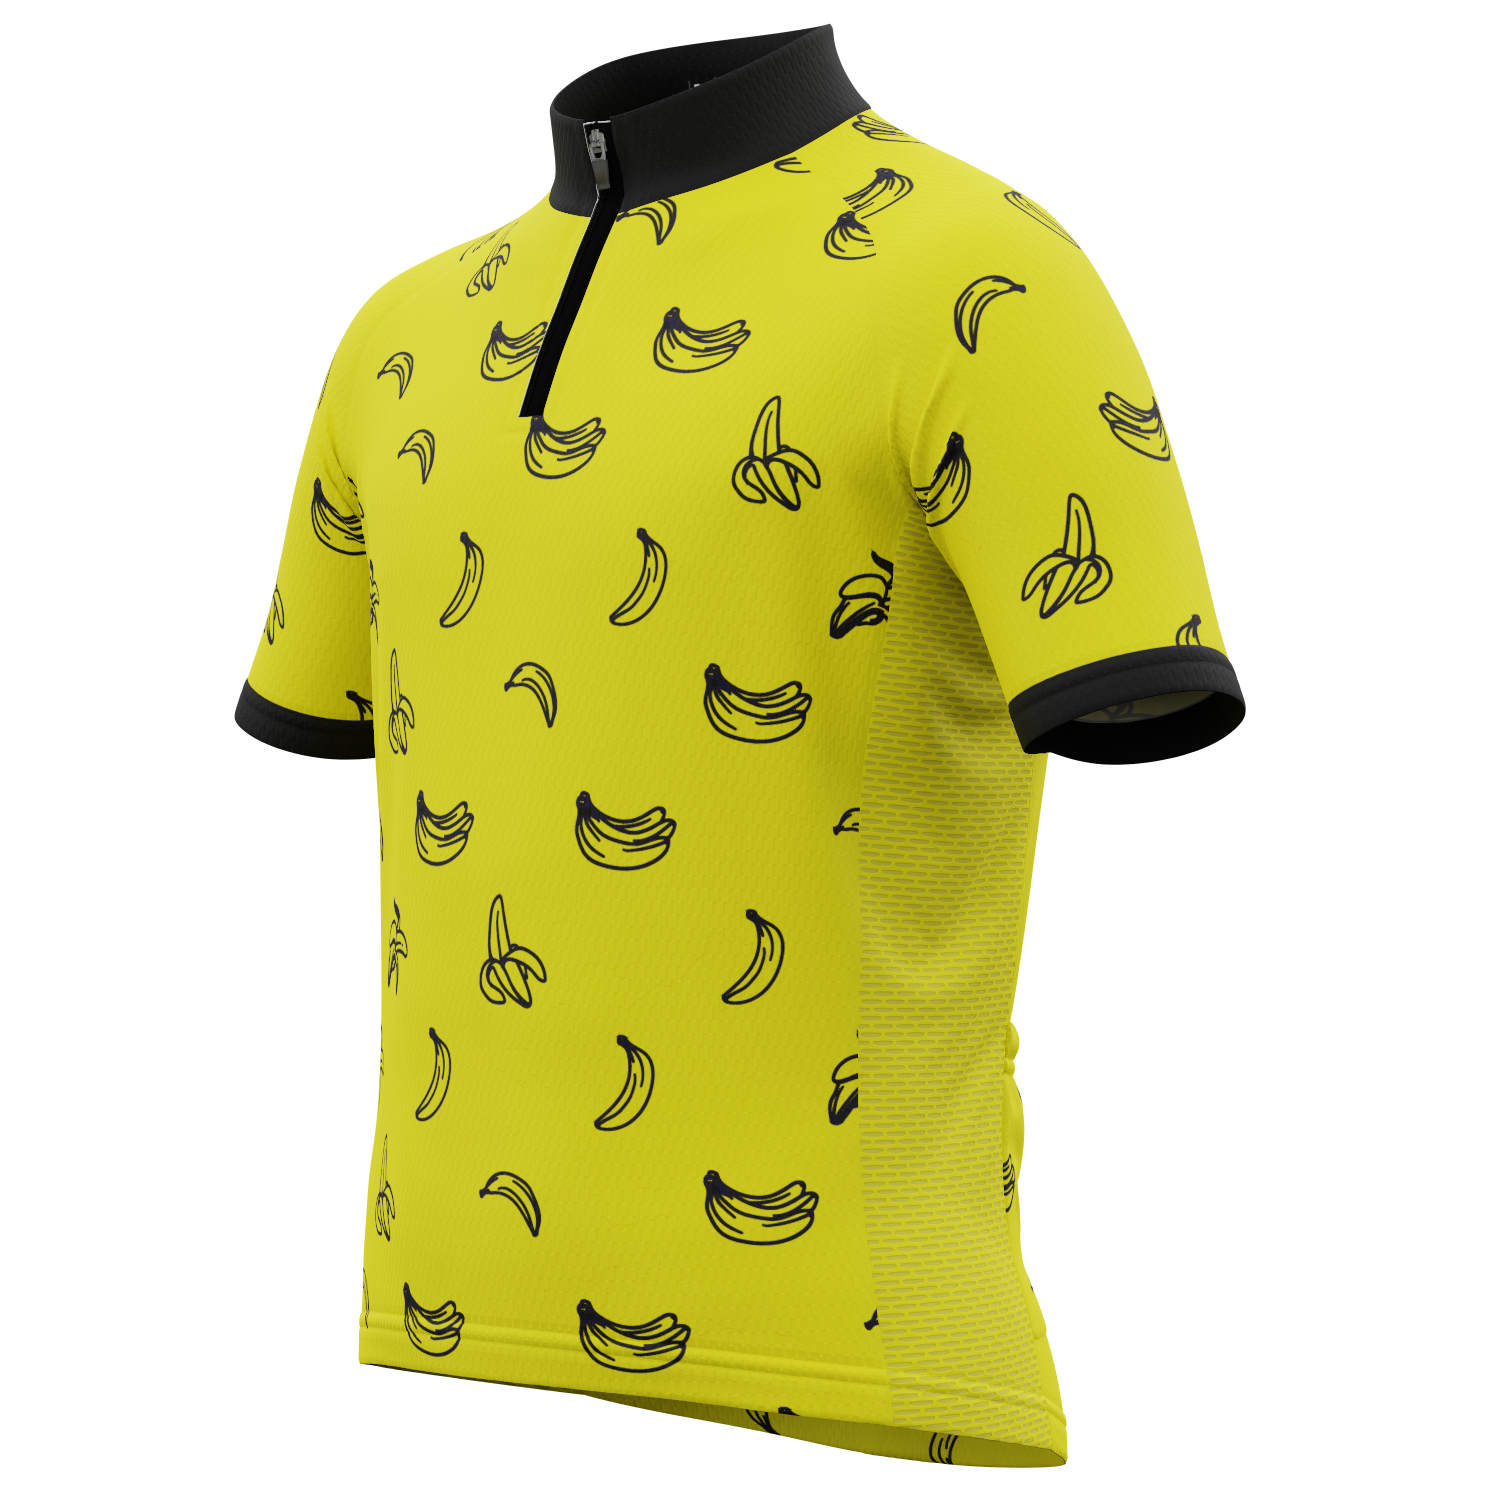 Kid's Must Be Bananas Short Sleeve Cycling Jersey [clearance]